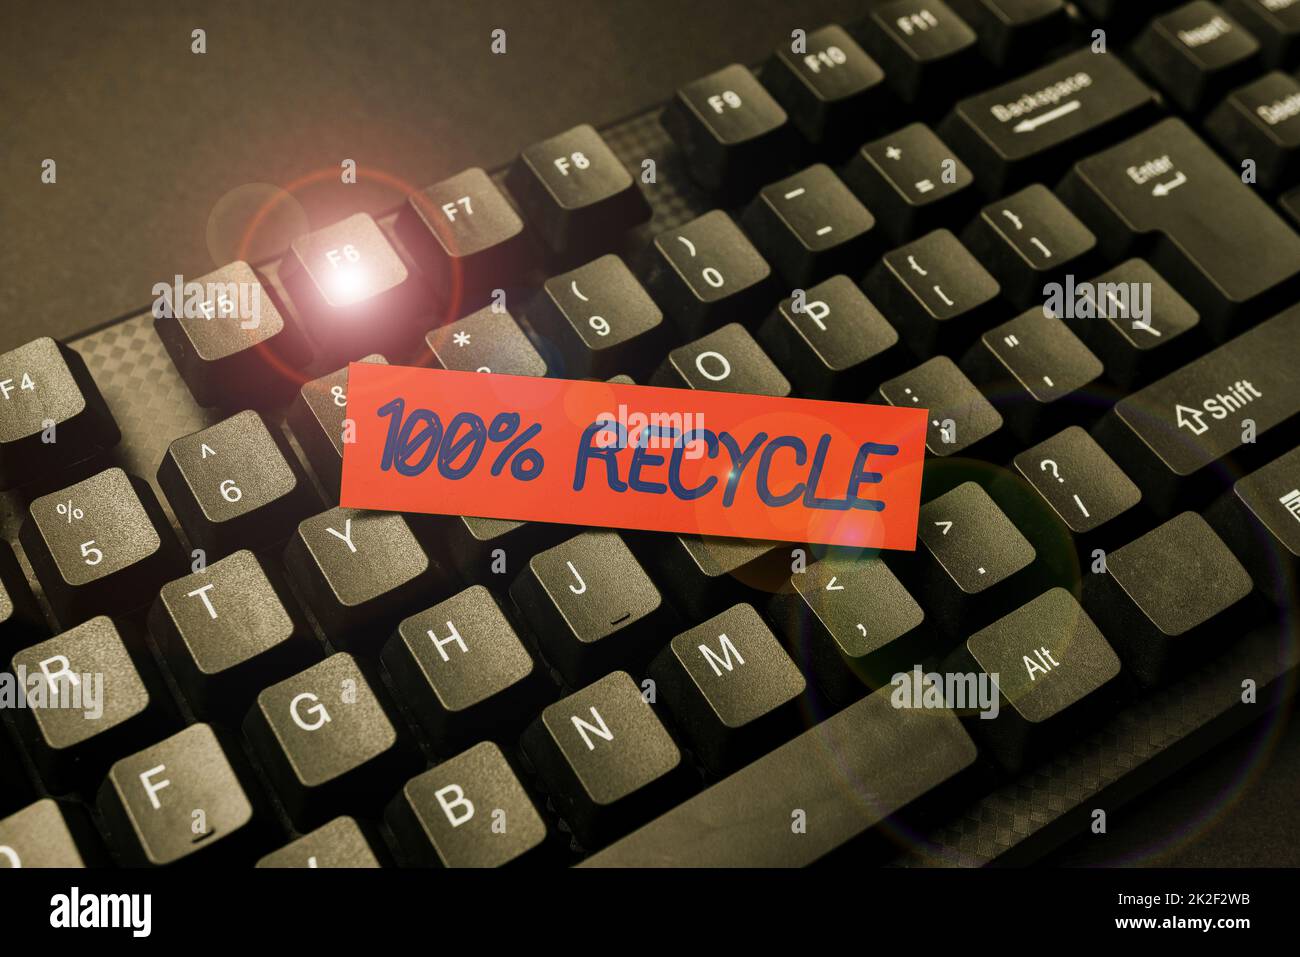 Writing displaying text 100 Percent Recycle. Business showcase Set of Biodegradable, BPA free and compostable recyclable Retyping Old Worksheet Data, Abstract Typing Online Reservation Lists Stock Photo